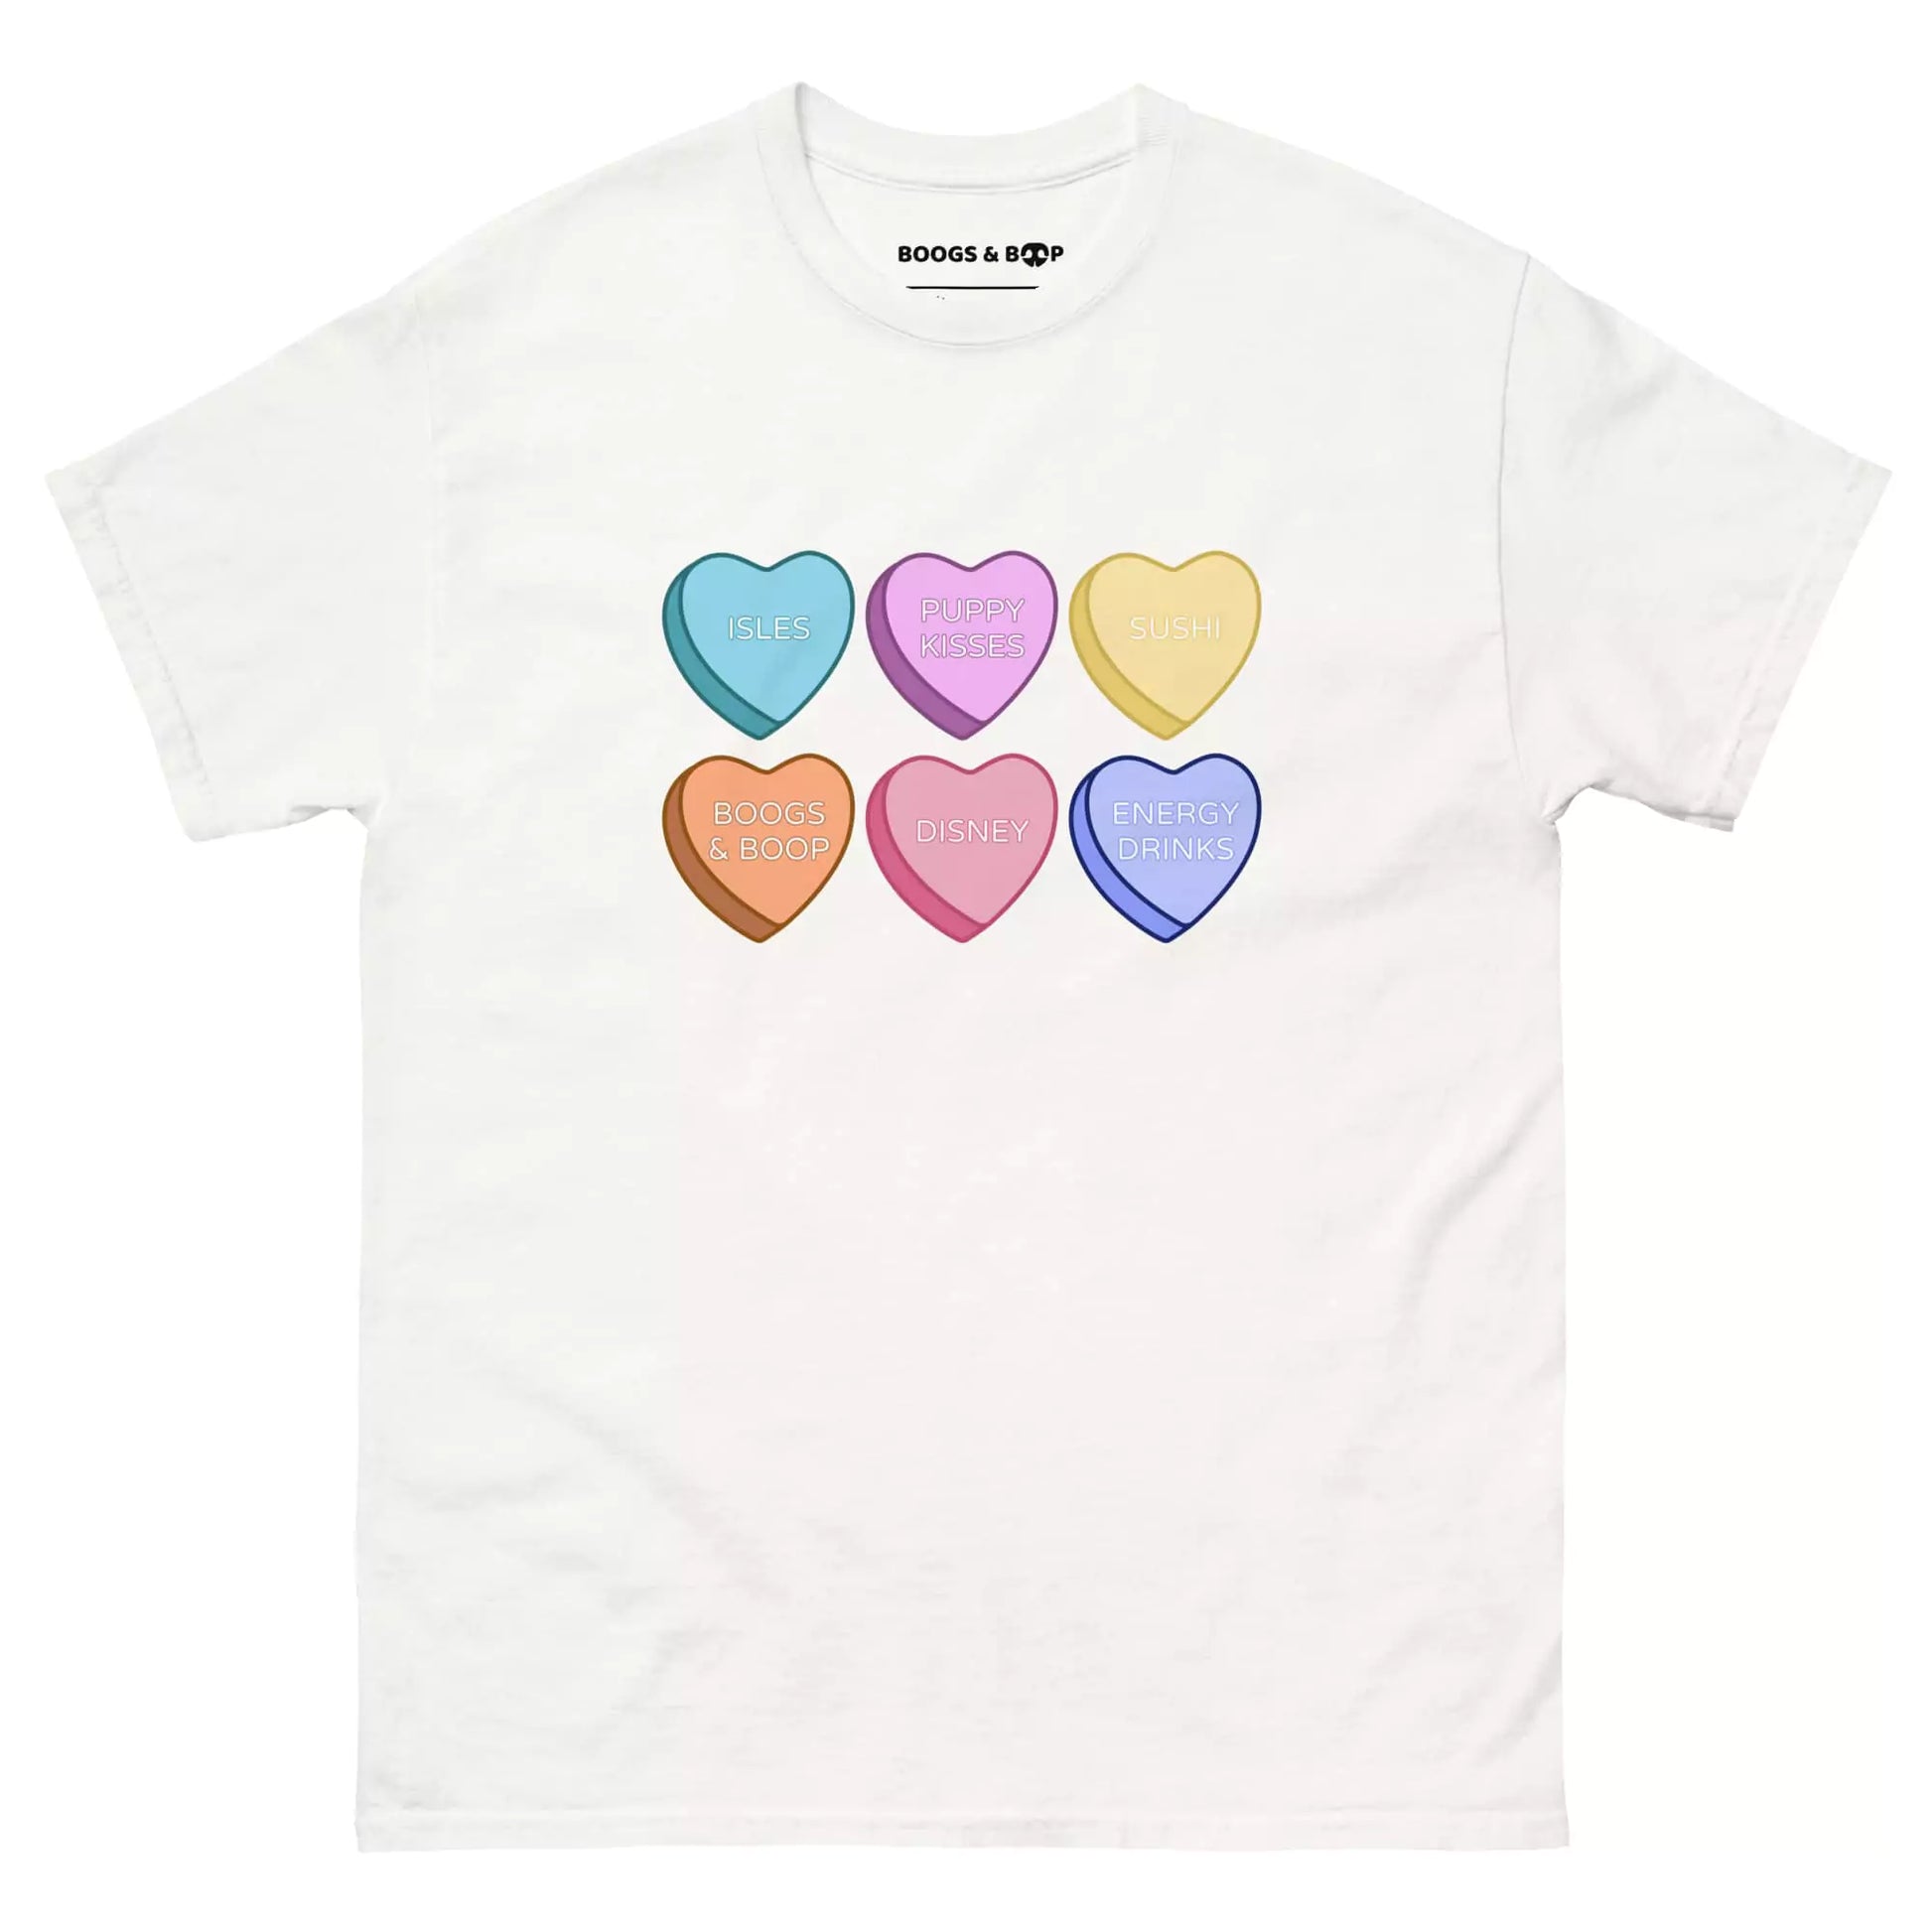 Shop Personalizable Valentine's Conversation Hearts T-Shirt by Boogs & Boop.